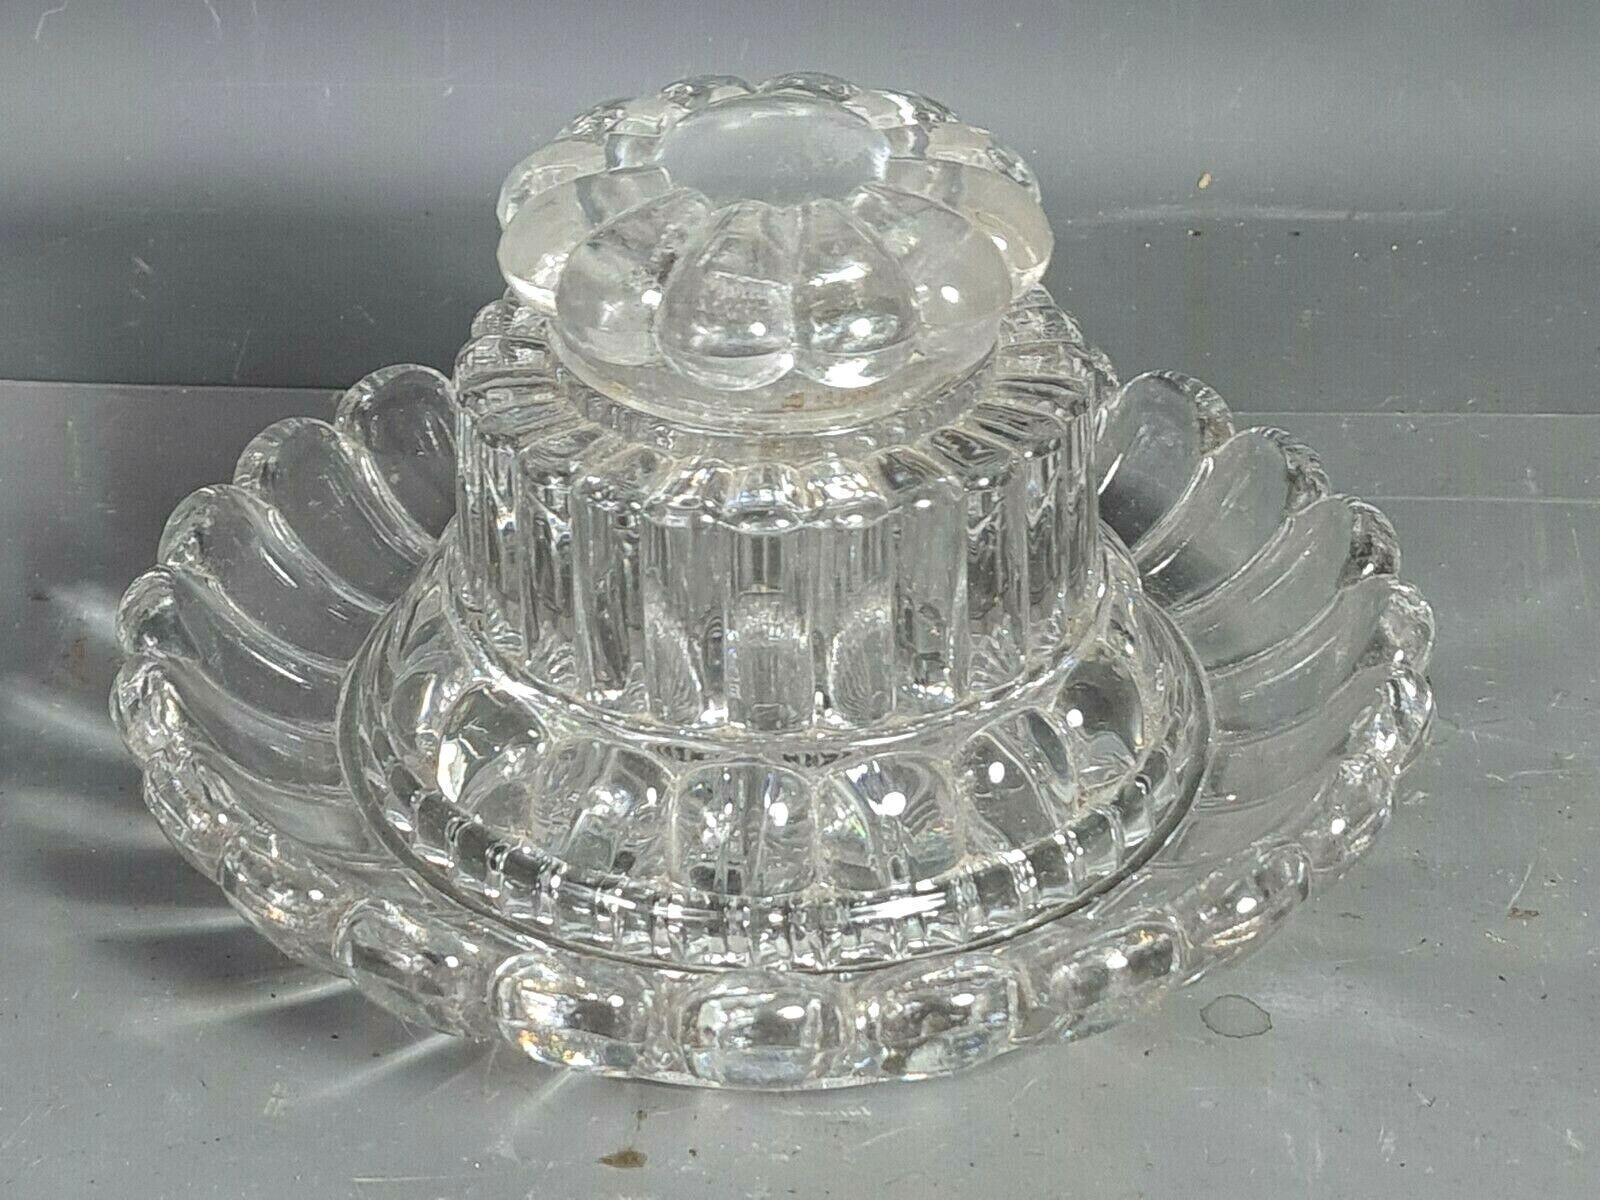 c1840 French Antique Louis Philippe Crystal Inkwell. 3 piece and a very rare item. Great accessory for your desk.